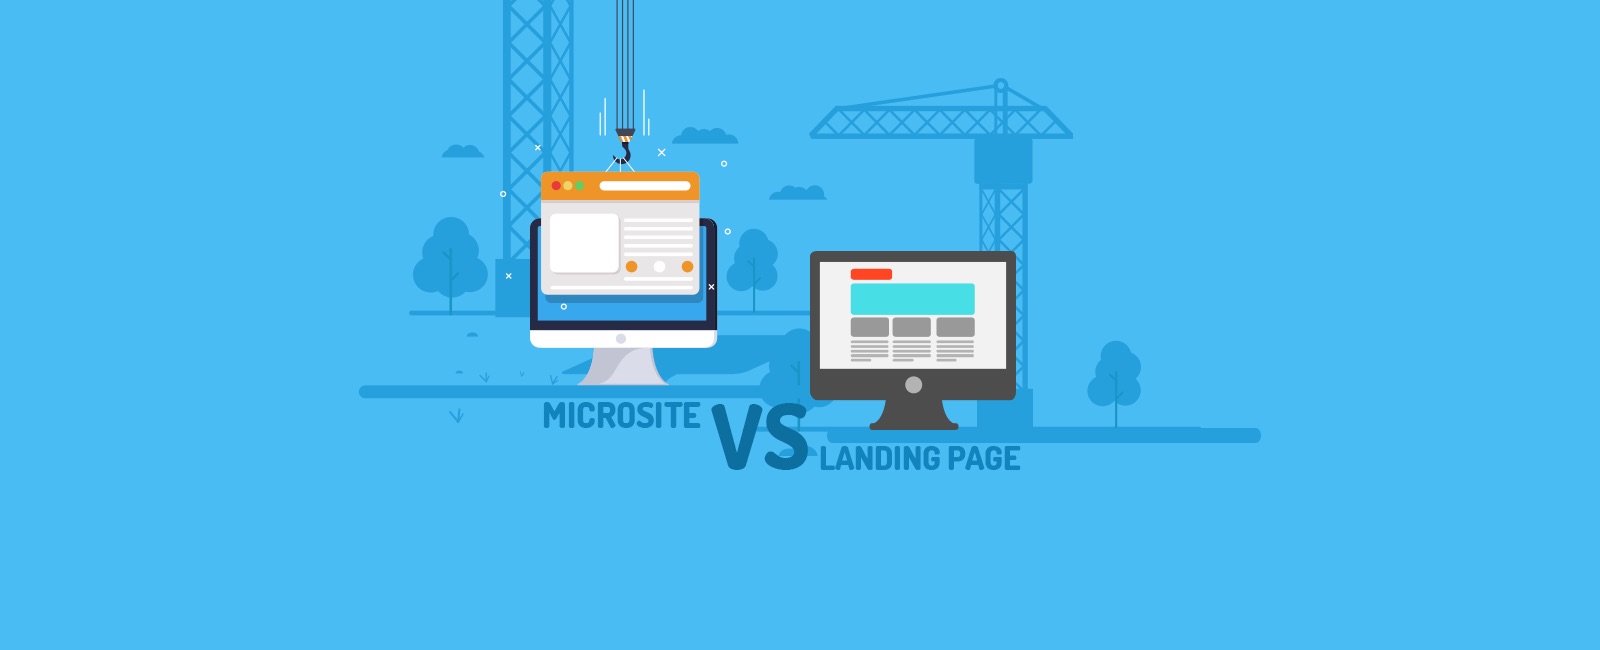 langding page vs microsite